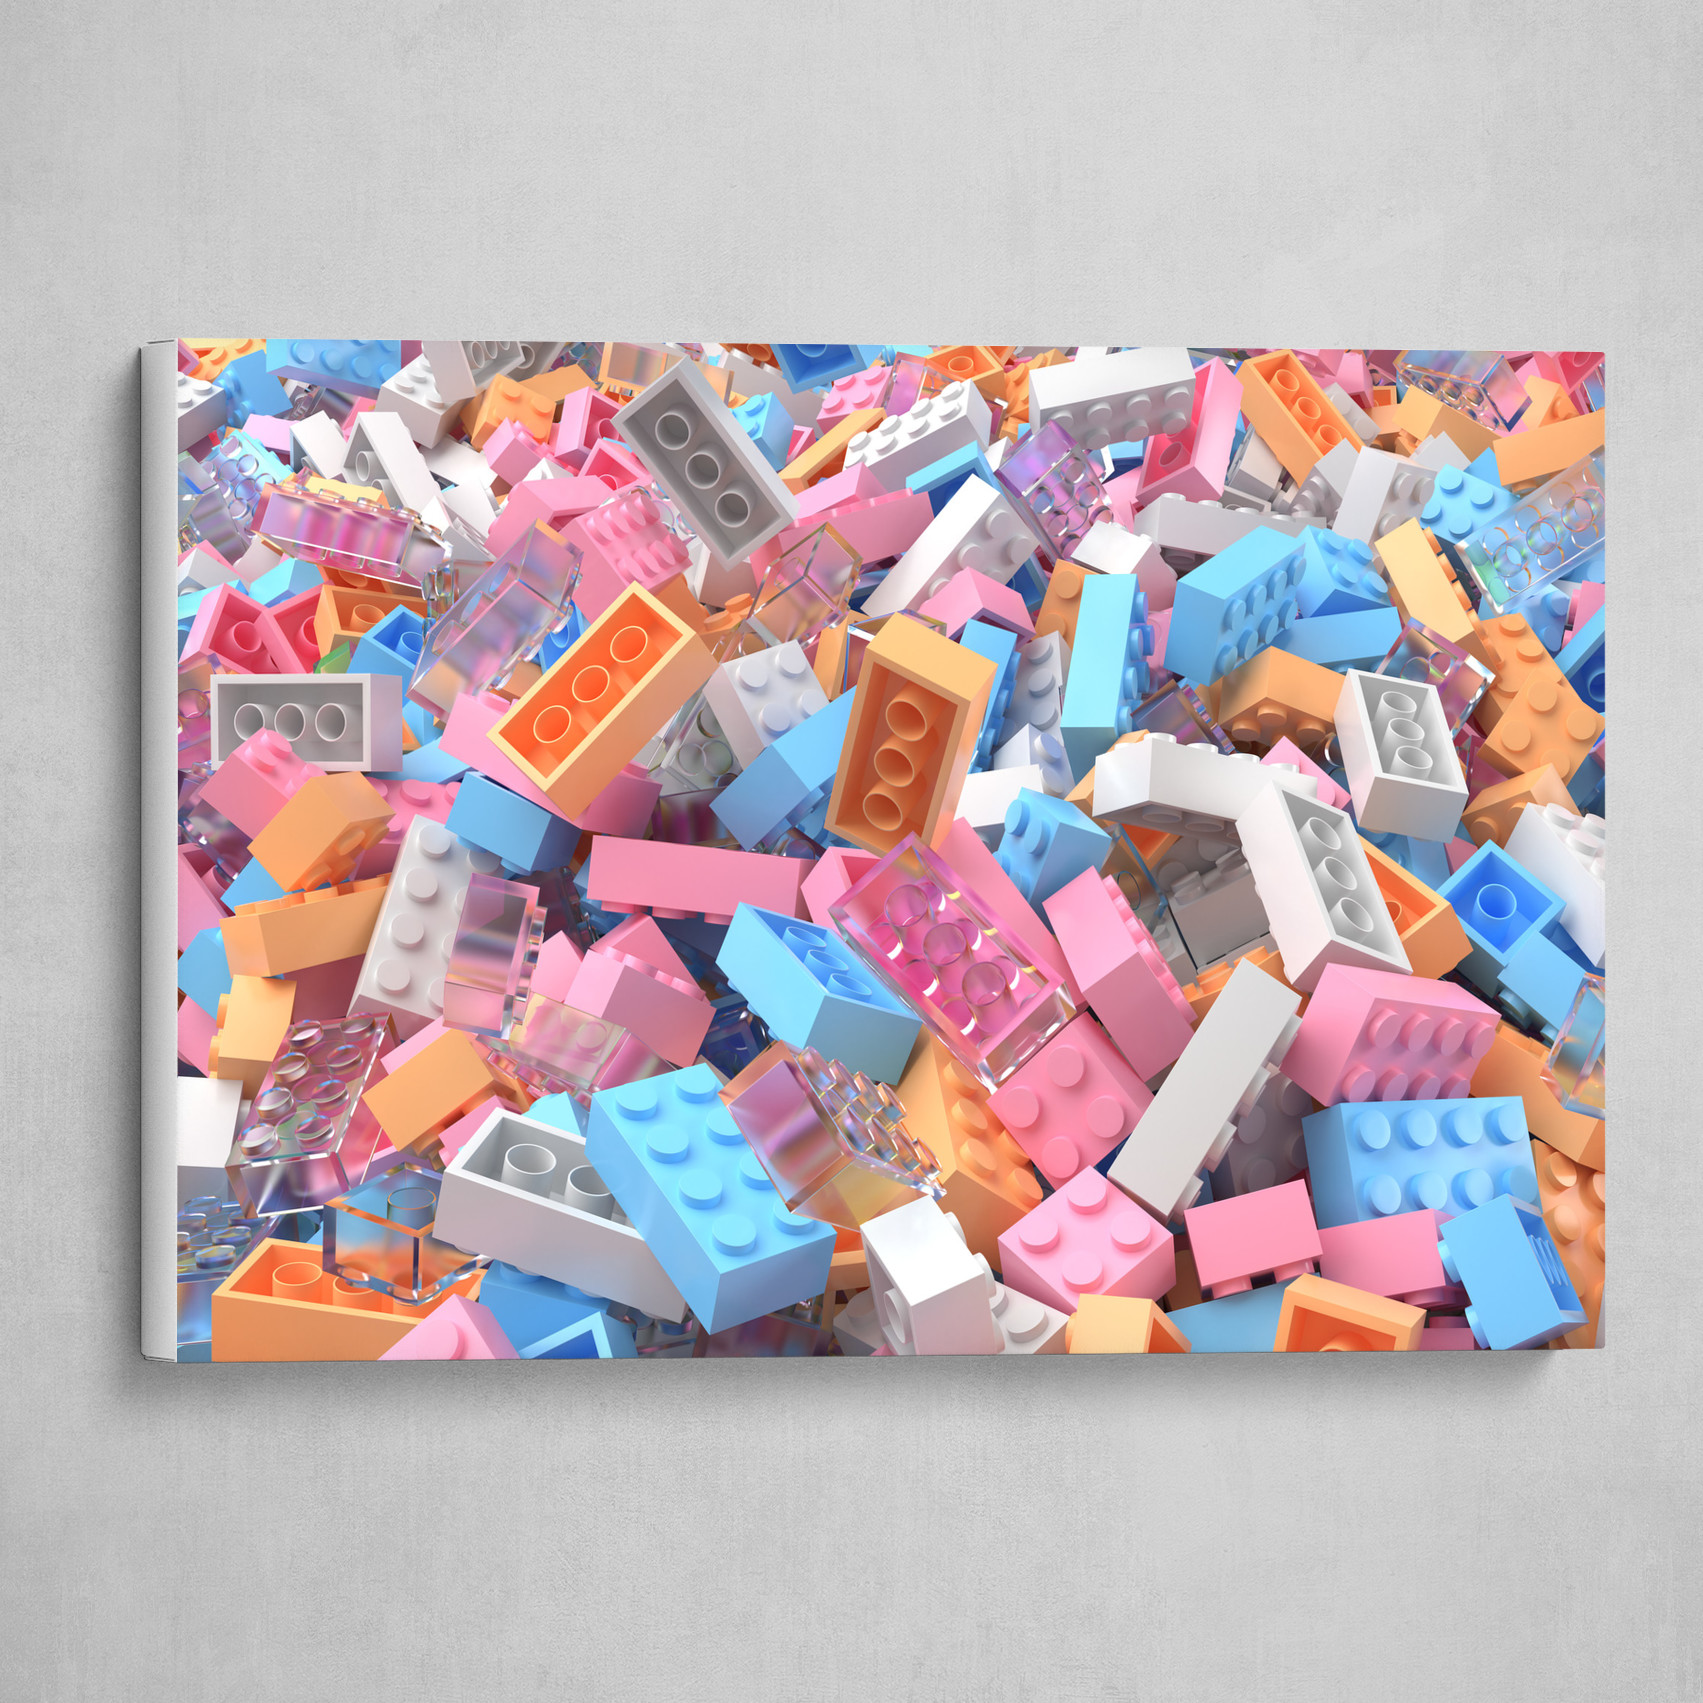 Henry Peterson - Colorful LEGO Bricks